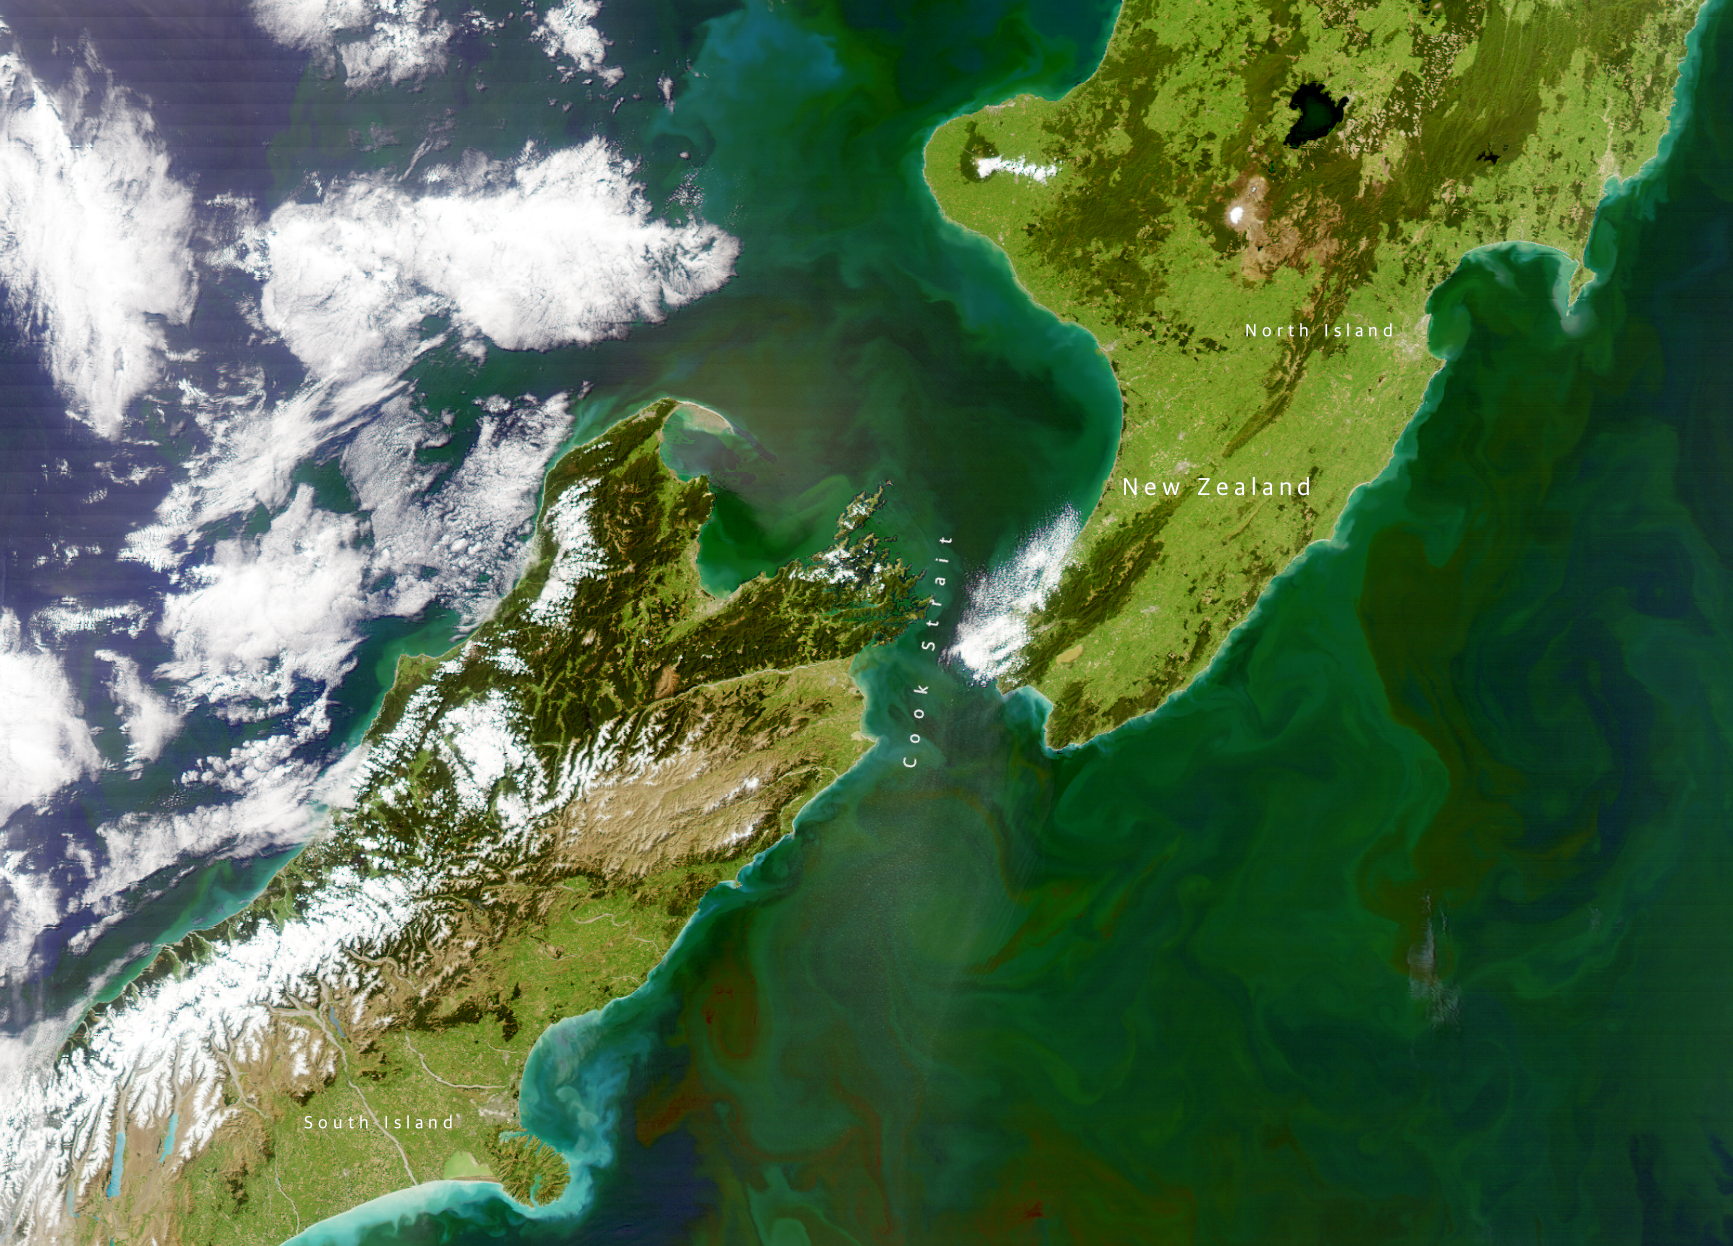 Phytoplankton blooms along the coasts of New Zealand as captured by the Moderate Resolution Imaging Spectroradiometer onboard NASA’s Aqua satellite. Scientists used images from the satellite to understand changes in the oceans color.